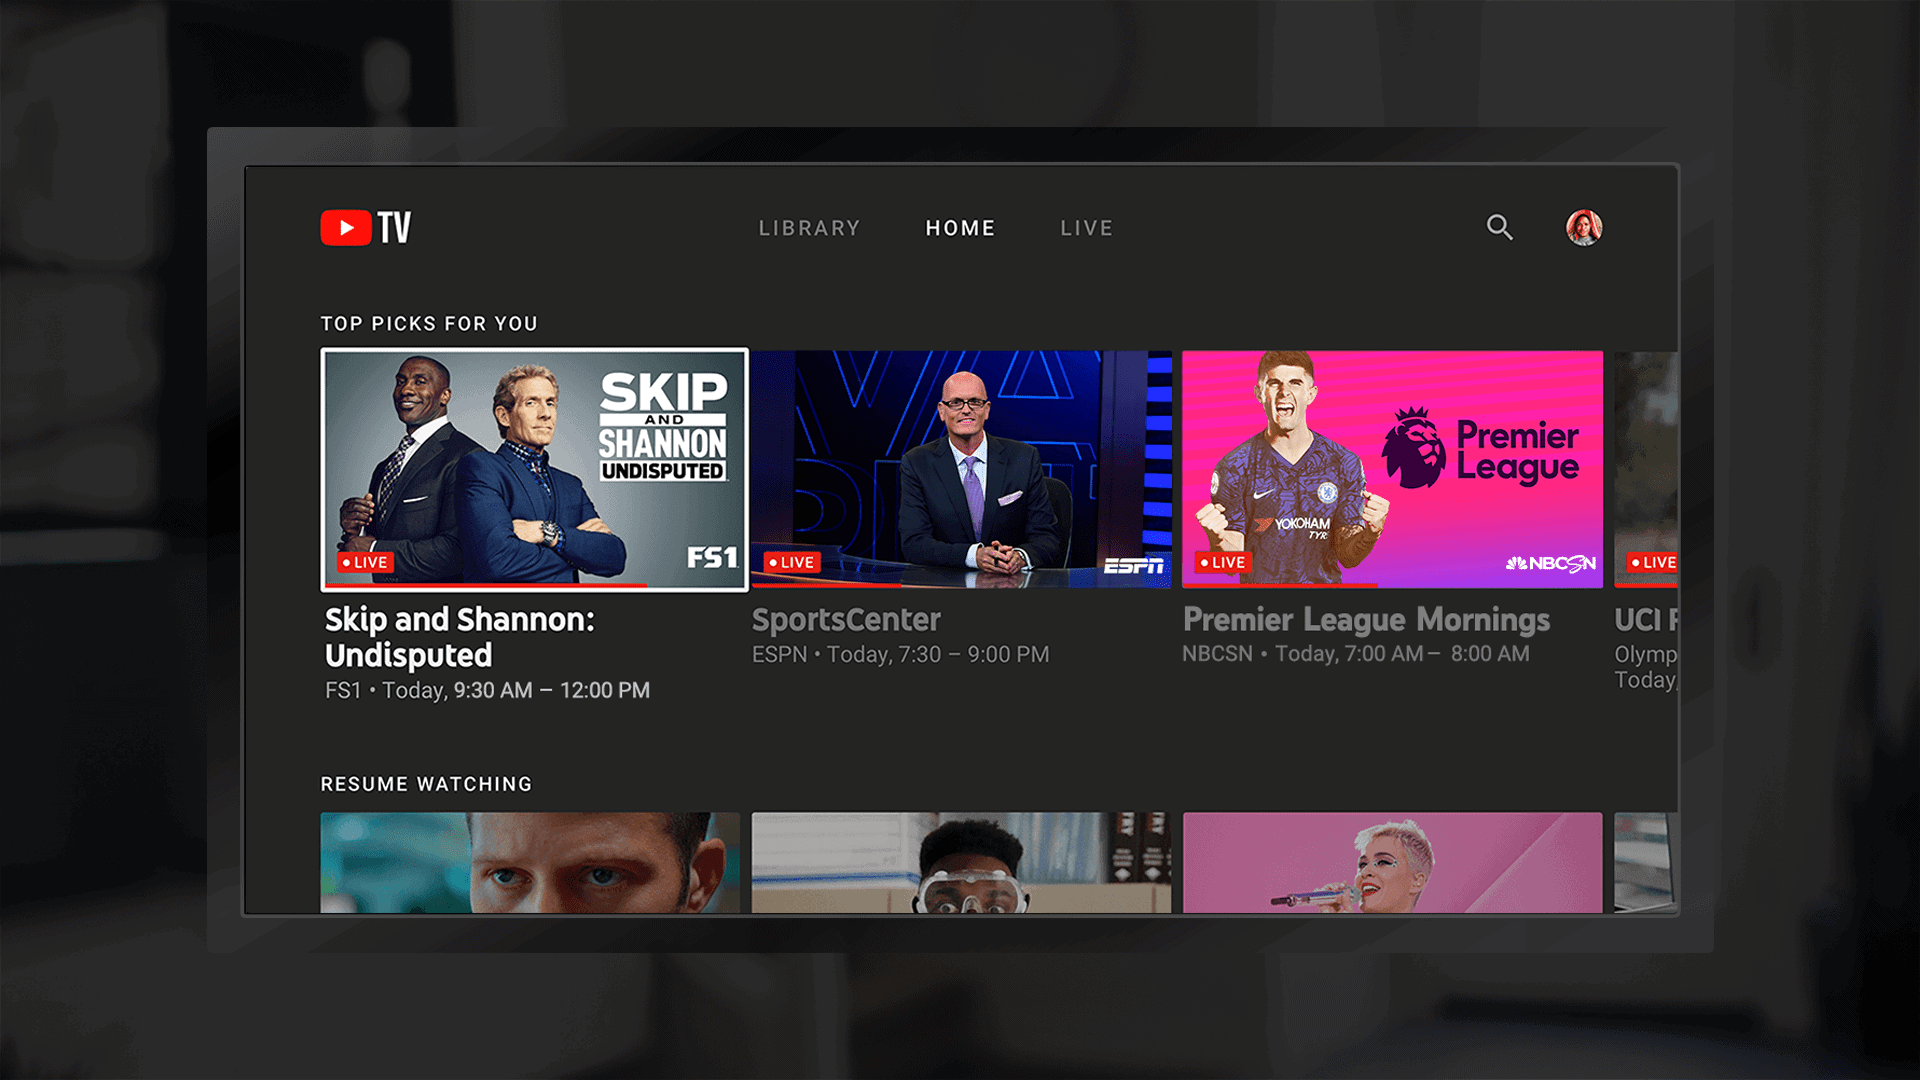 Youtube Tv App Now Available On Sony Playstation 4 Video Game Console And Presumably Upcoming Ps5 Stark Insider